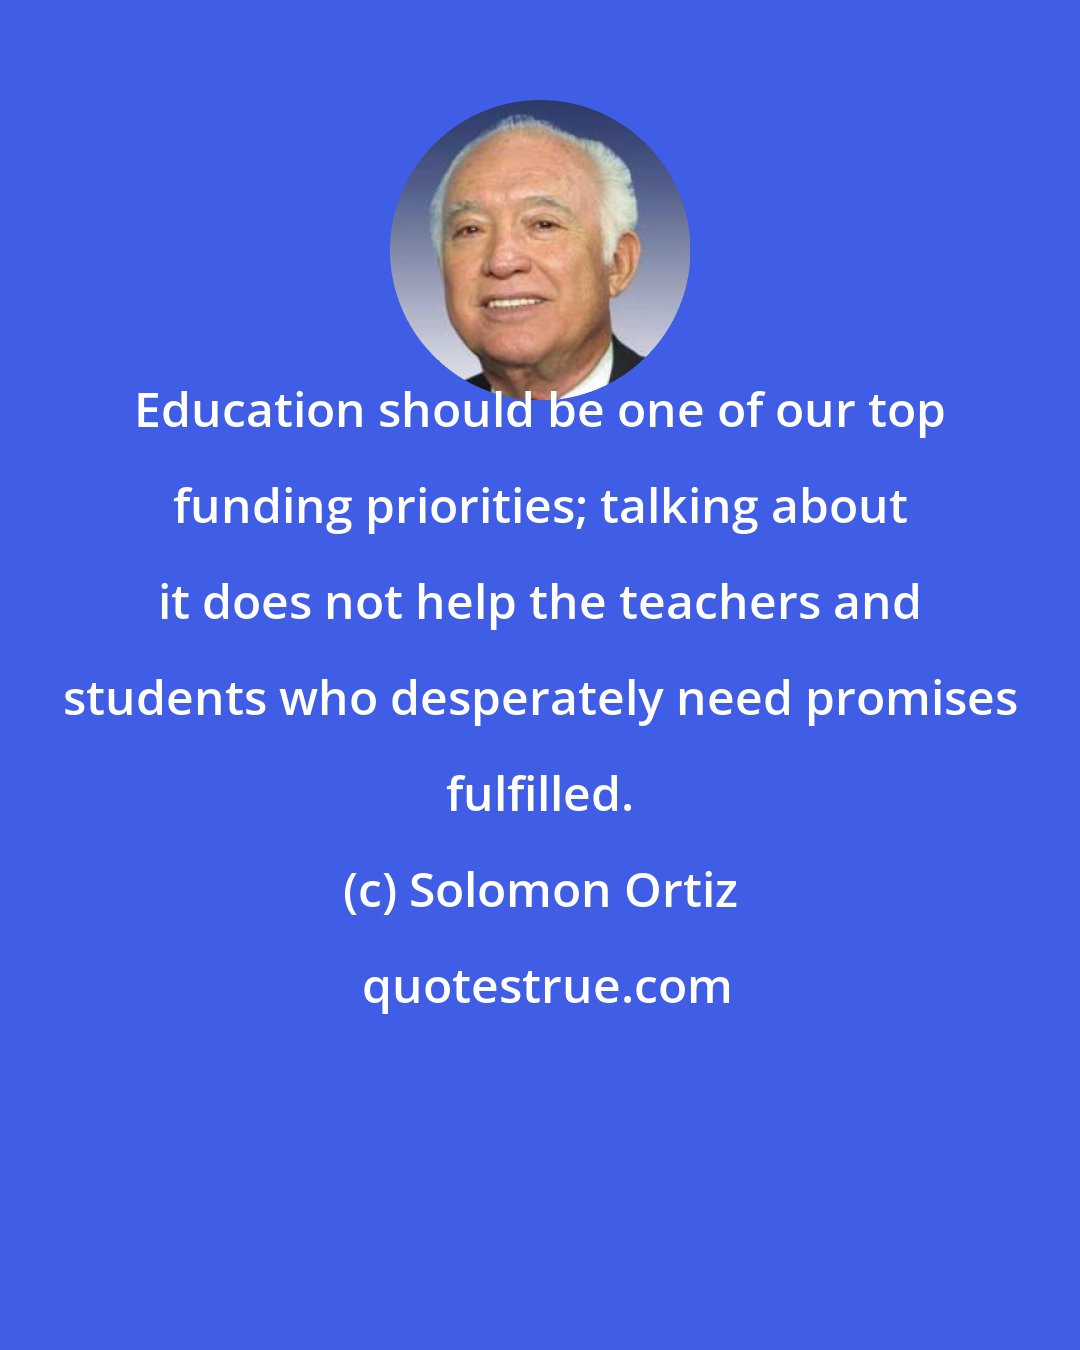 Solomon Ortiz: Education should be one of our top funding priorities; talking about it does not help the teachers and students who desperately need promises fulfilled.